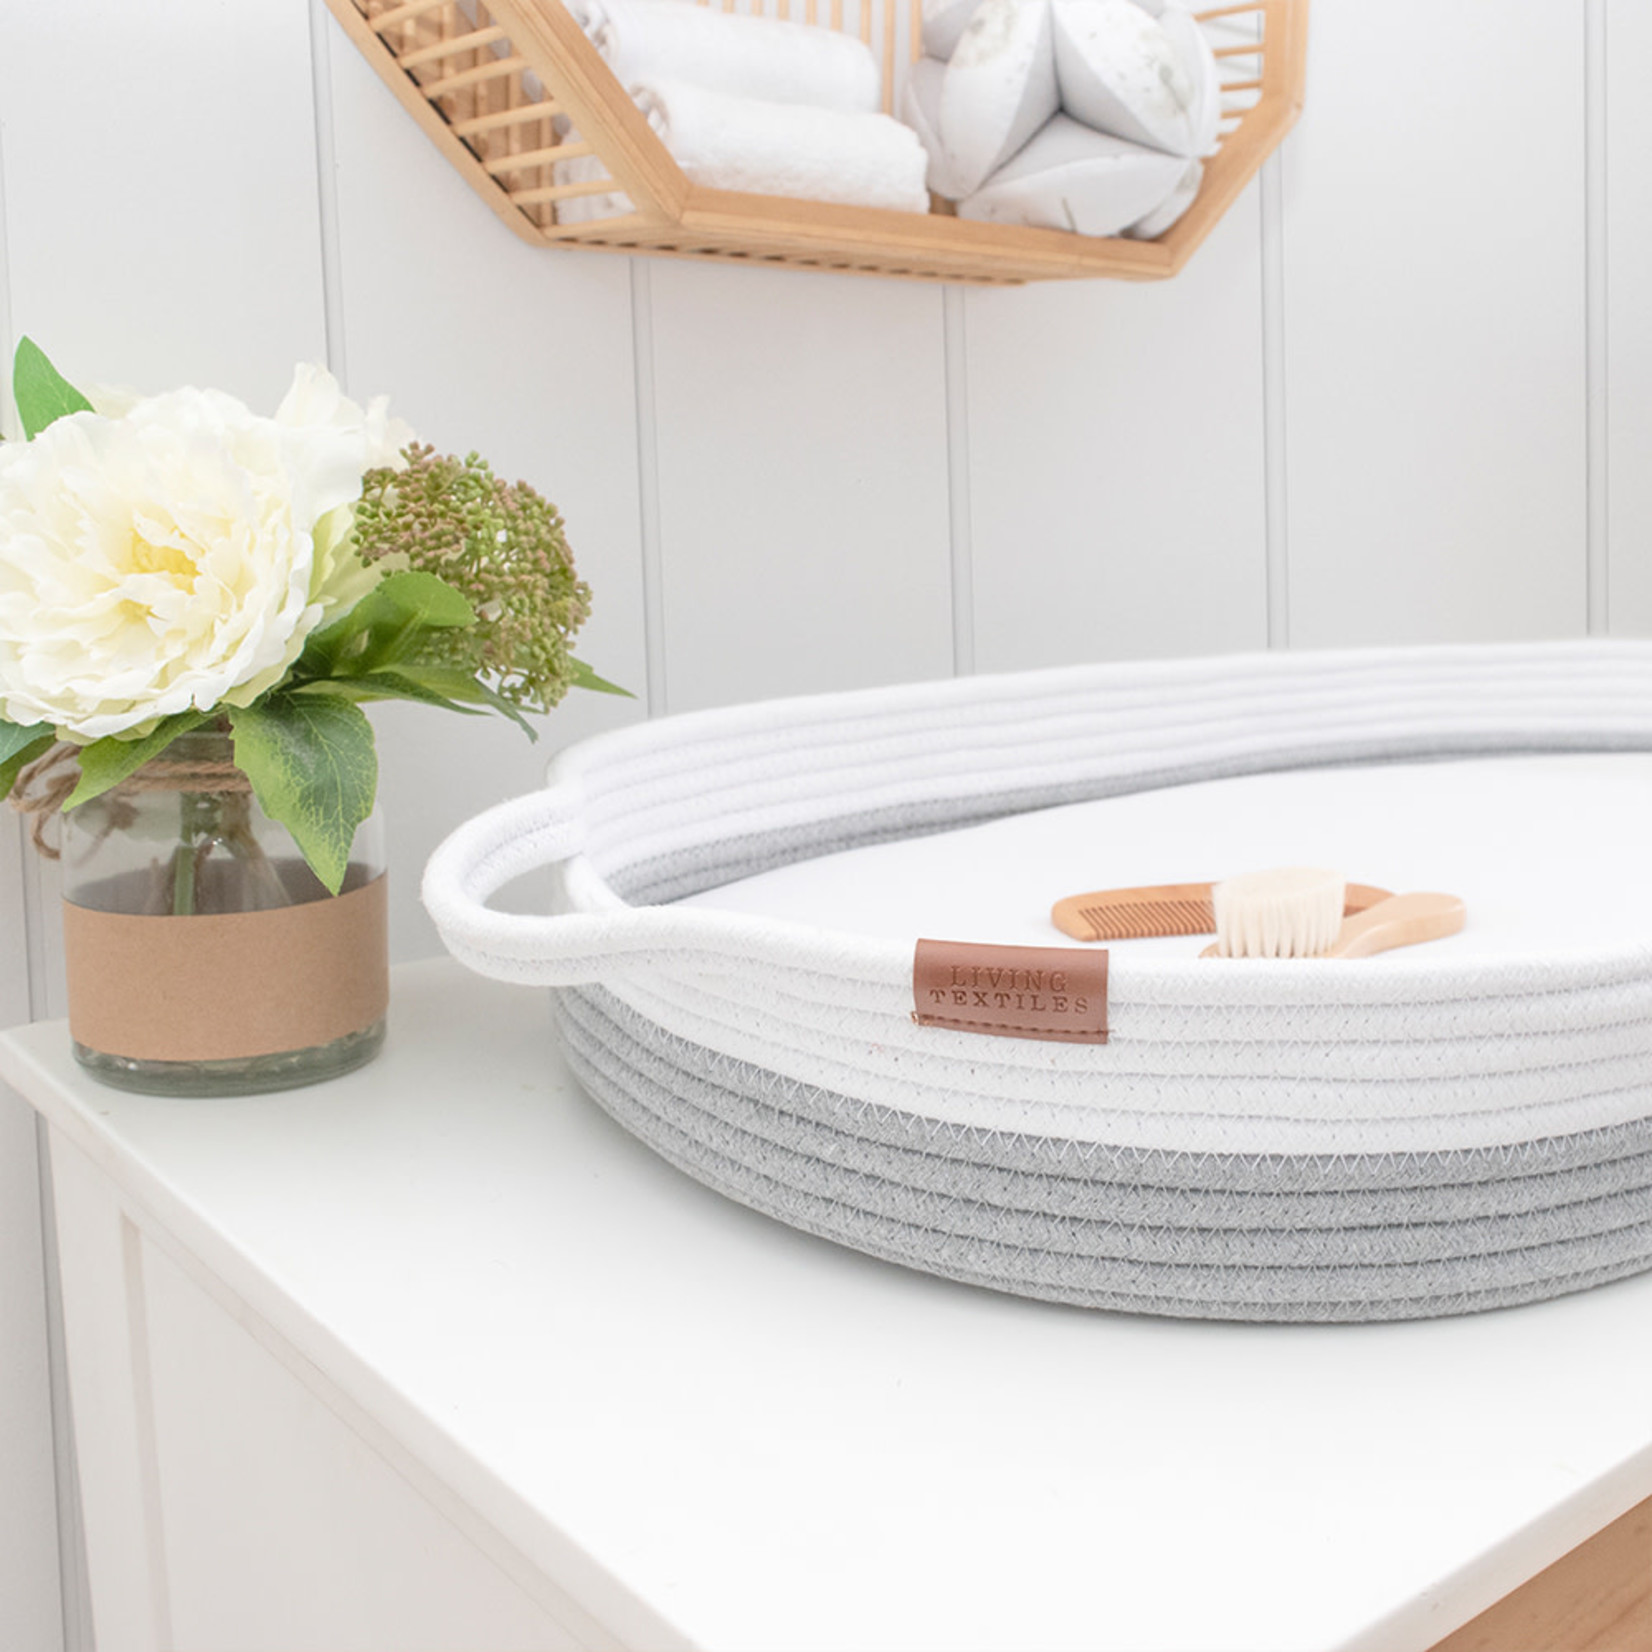 Living Textiles Living Textiles Cotton Rope Change Basket With mattress & cover-White/Grey